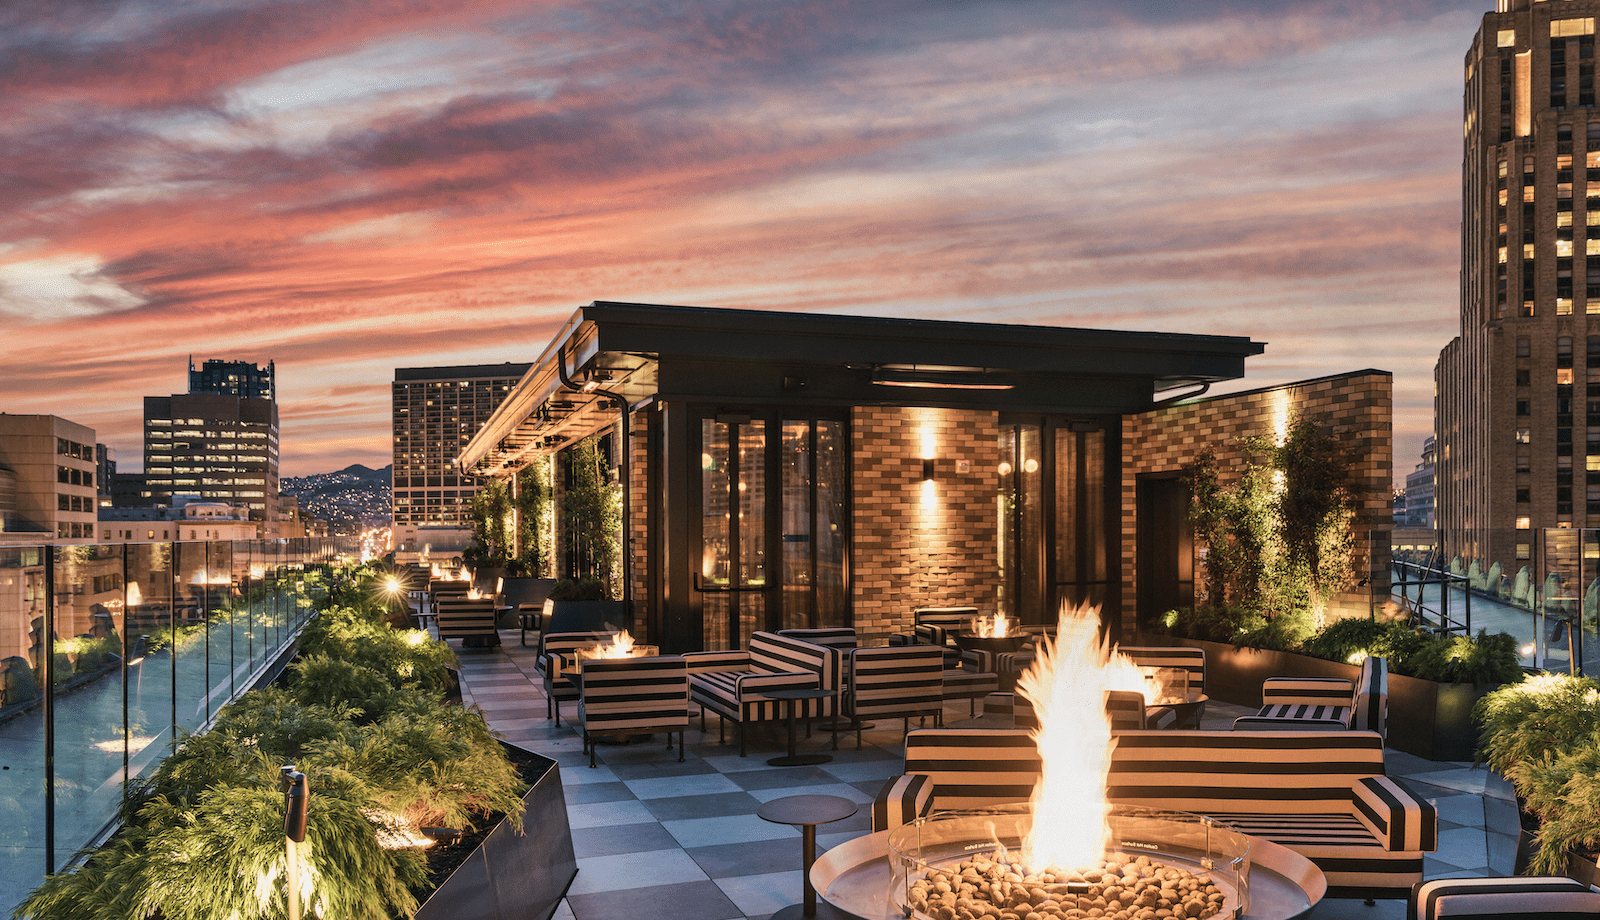 The hip outdoor patio with fire pit at Proper San Francisco